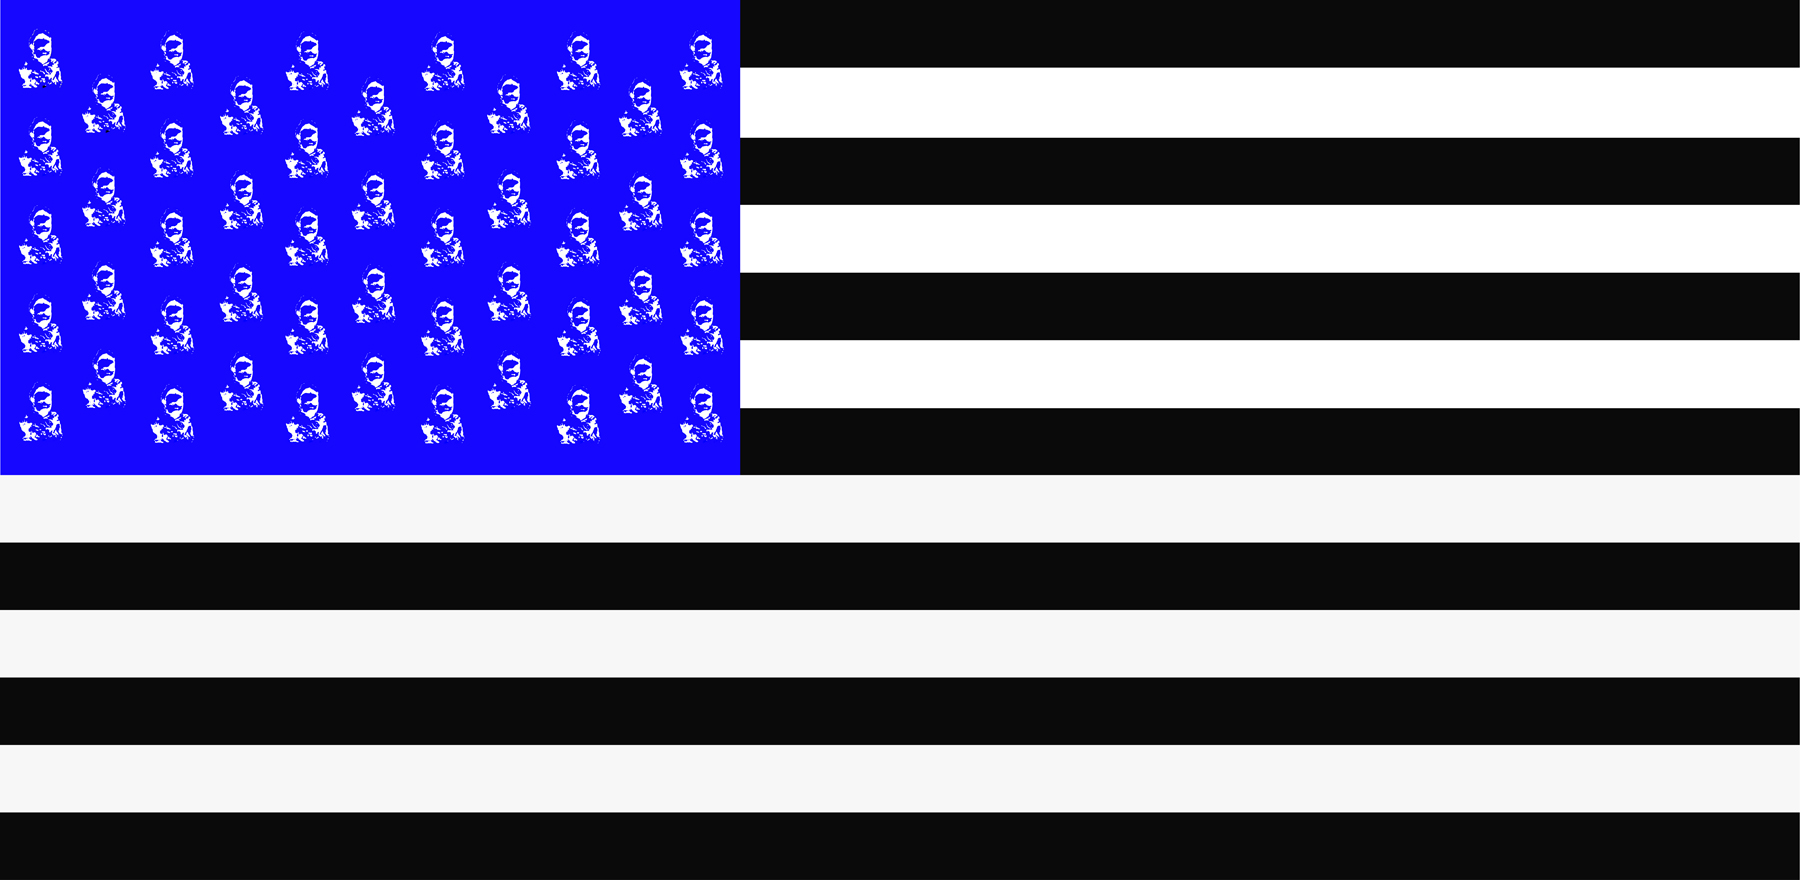 Design resembling the American flag with black and white stripes and small white images of a young boy repeated on a blue rectangle in the top left corner